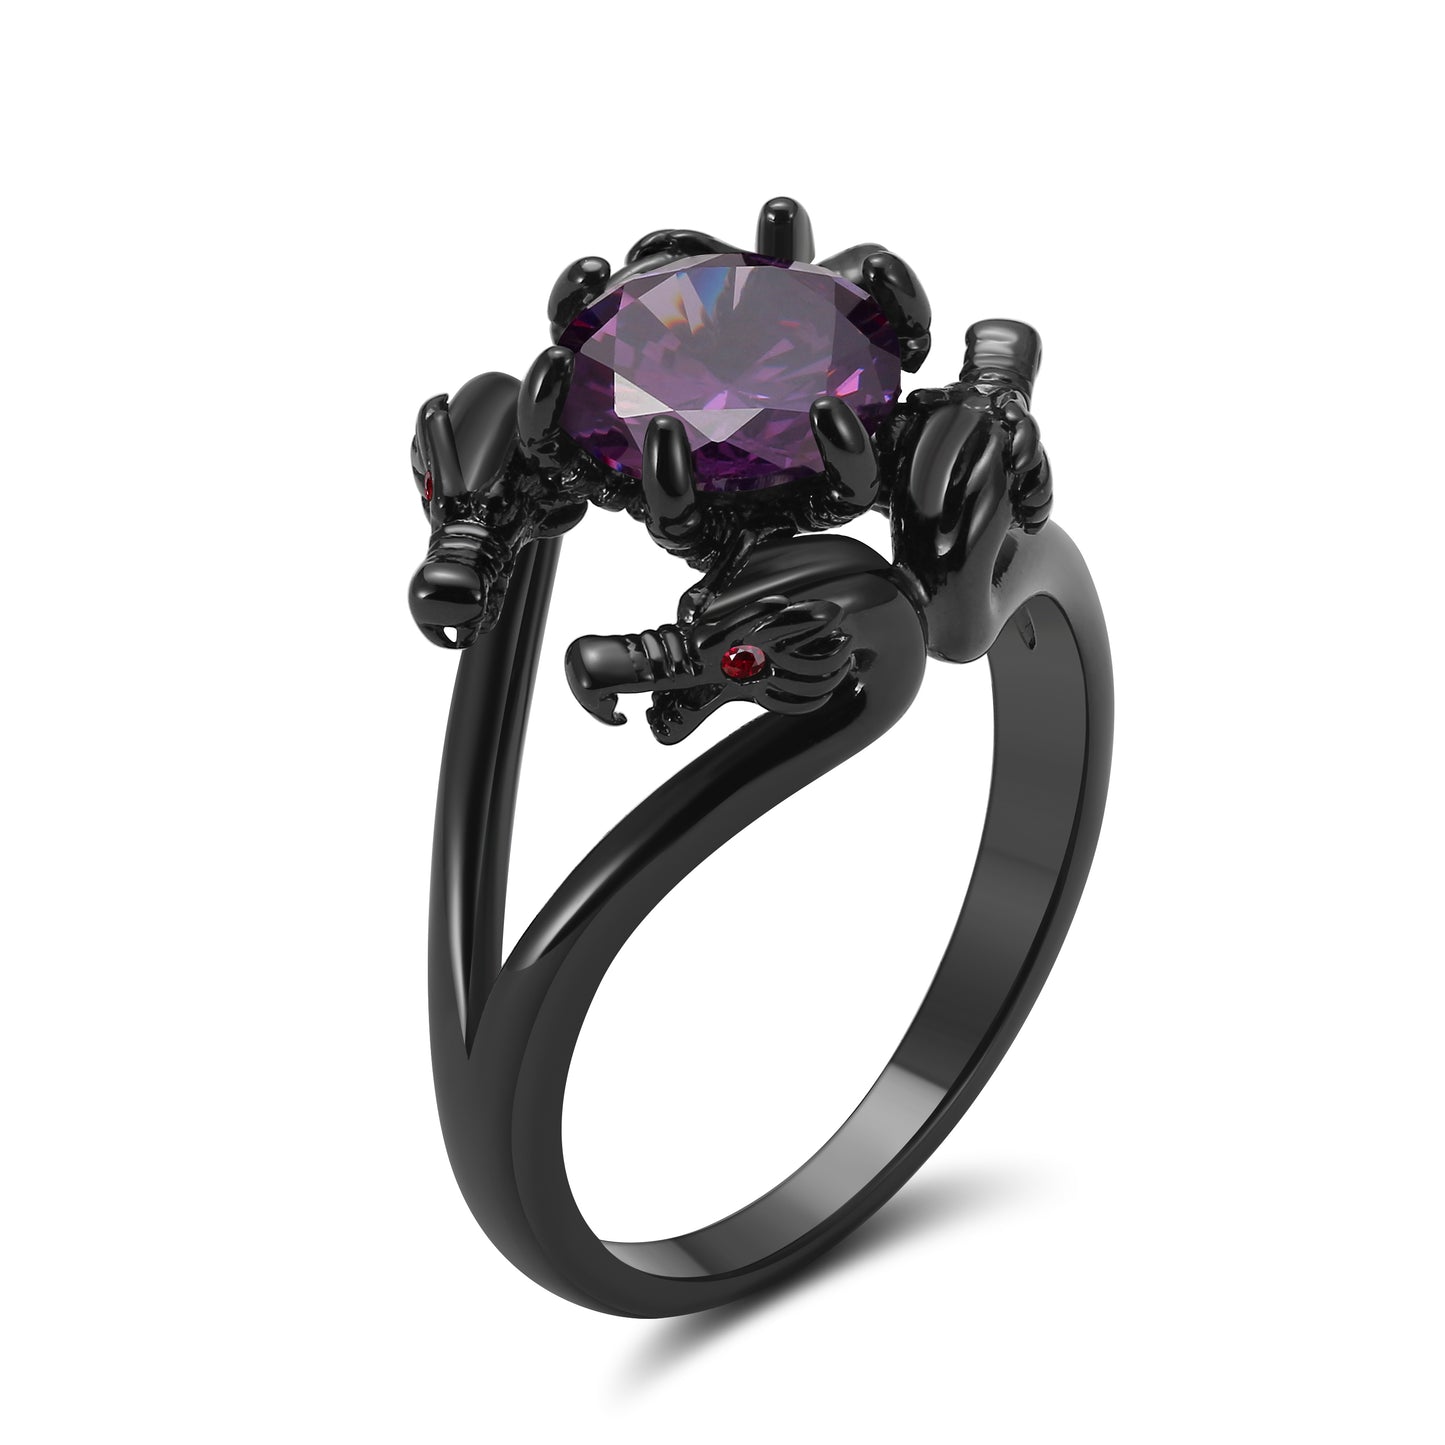 Dragon Ring Gothic Solitaire Cz Black Gothic Engagement Ring Girl Ginger Lyne Collection - Purple,9